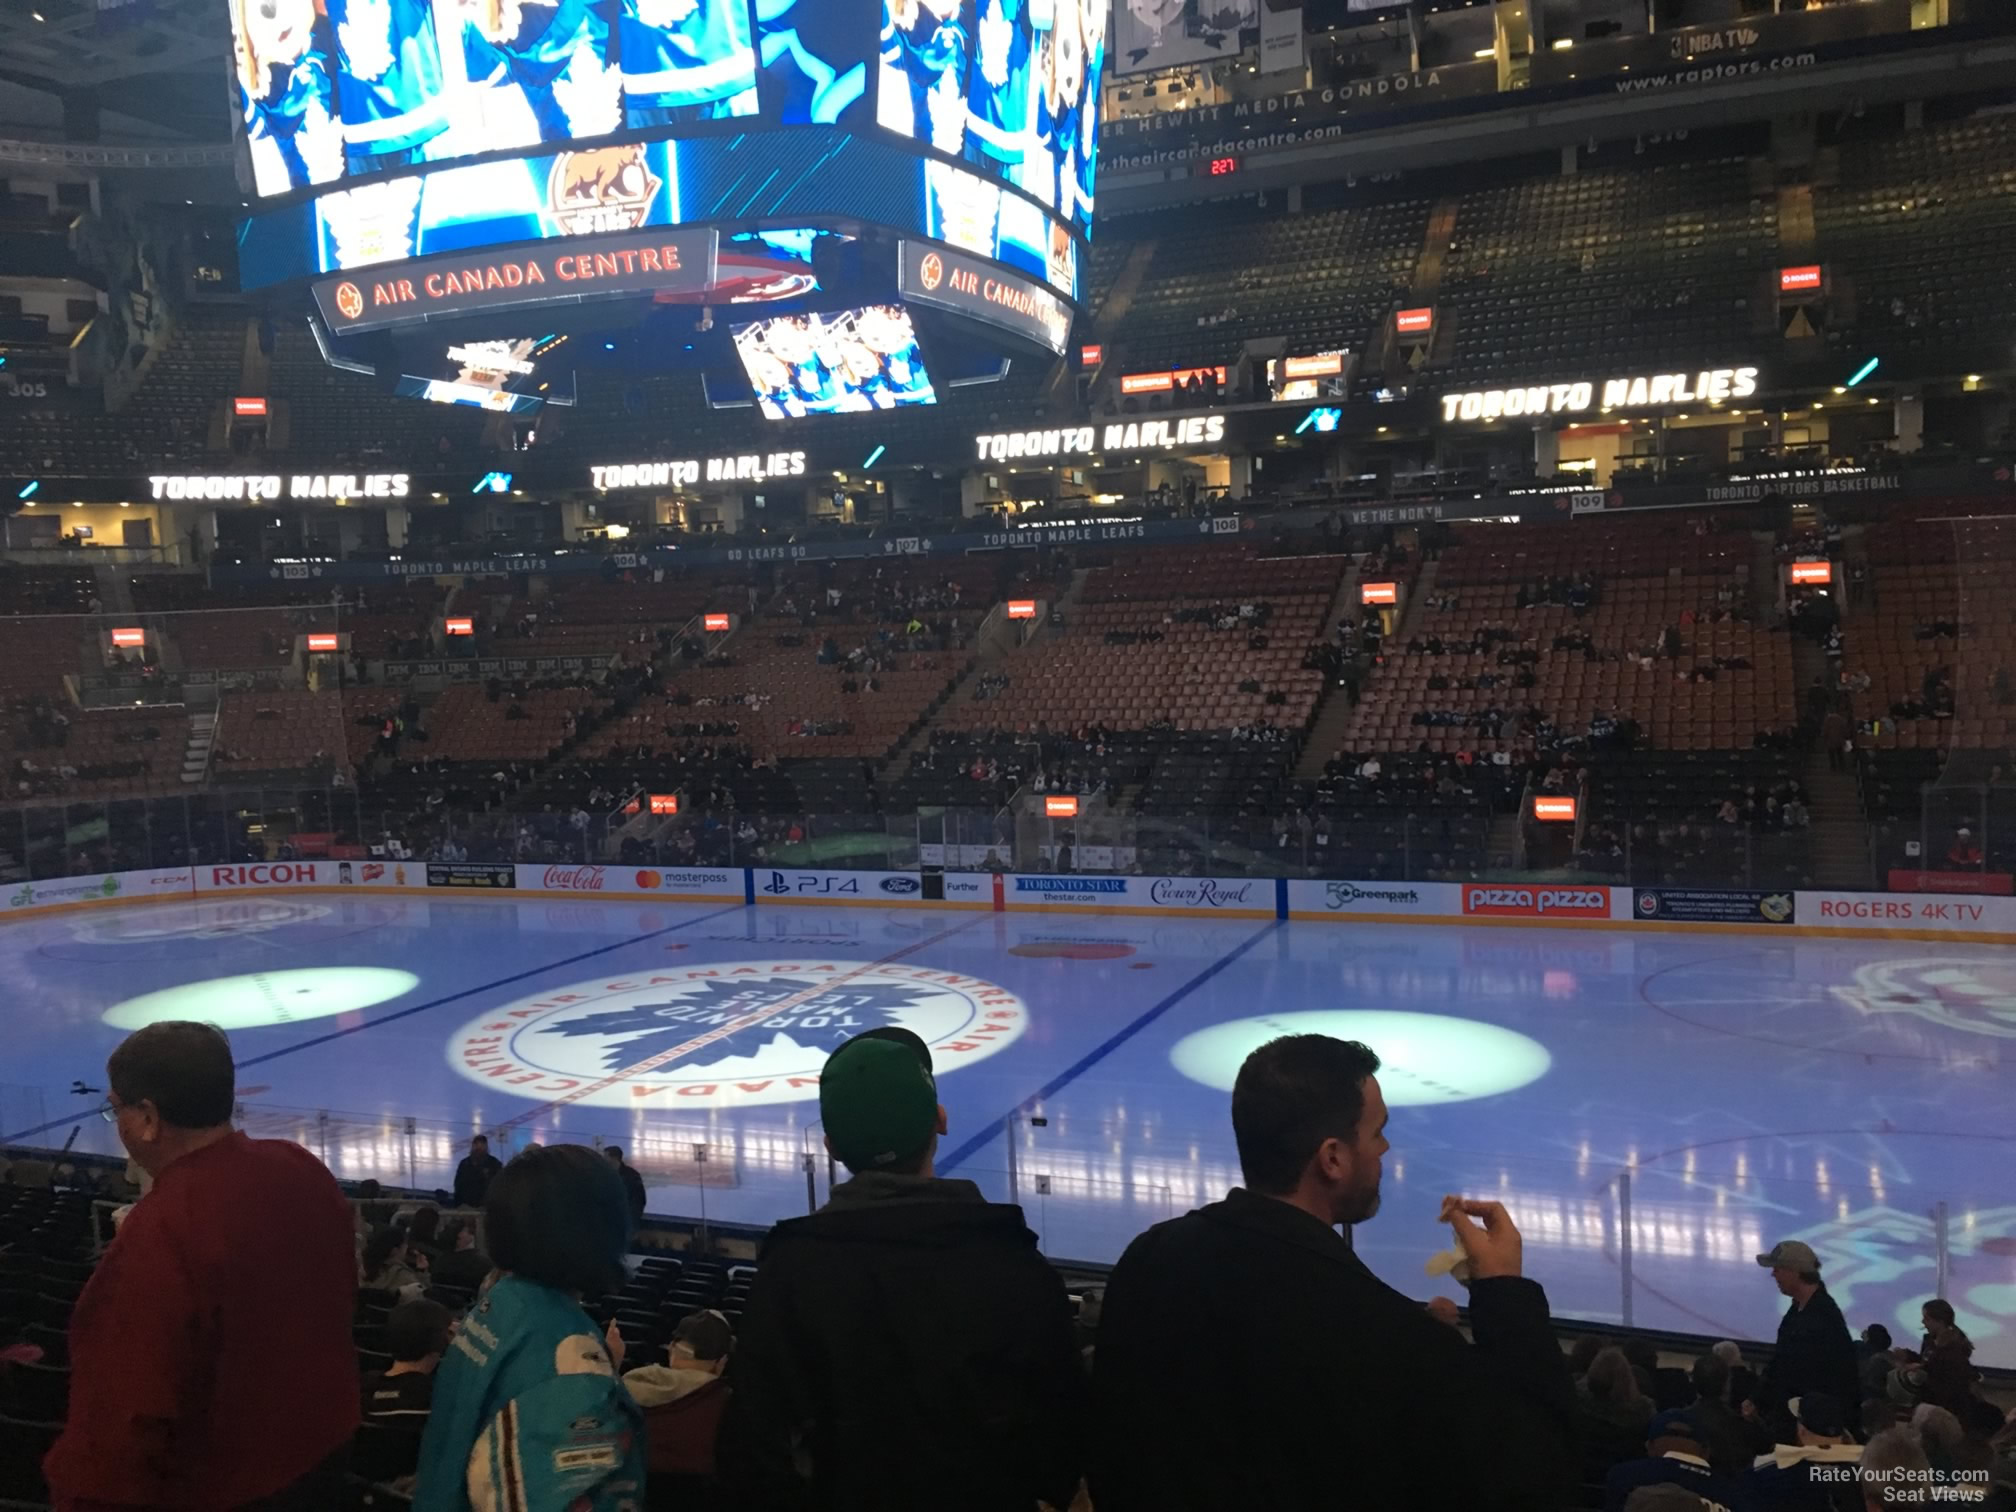 section 118, row 20 seat view  for hockey - scotiabank arena